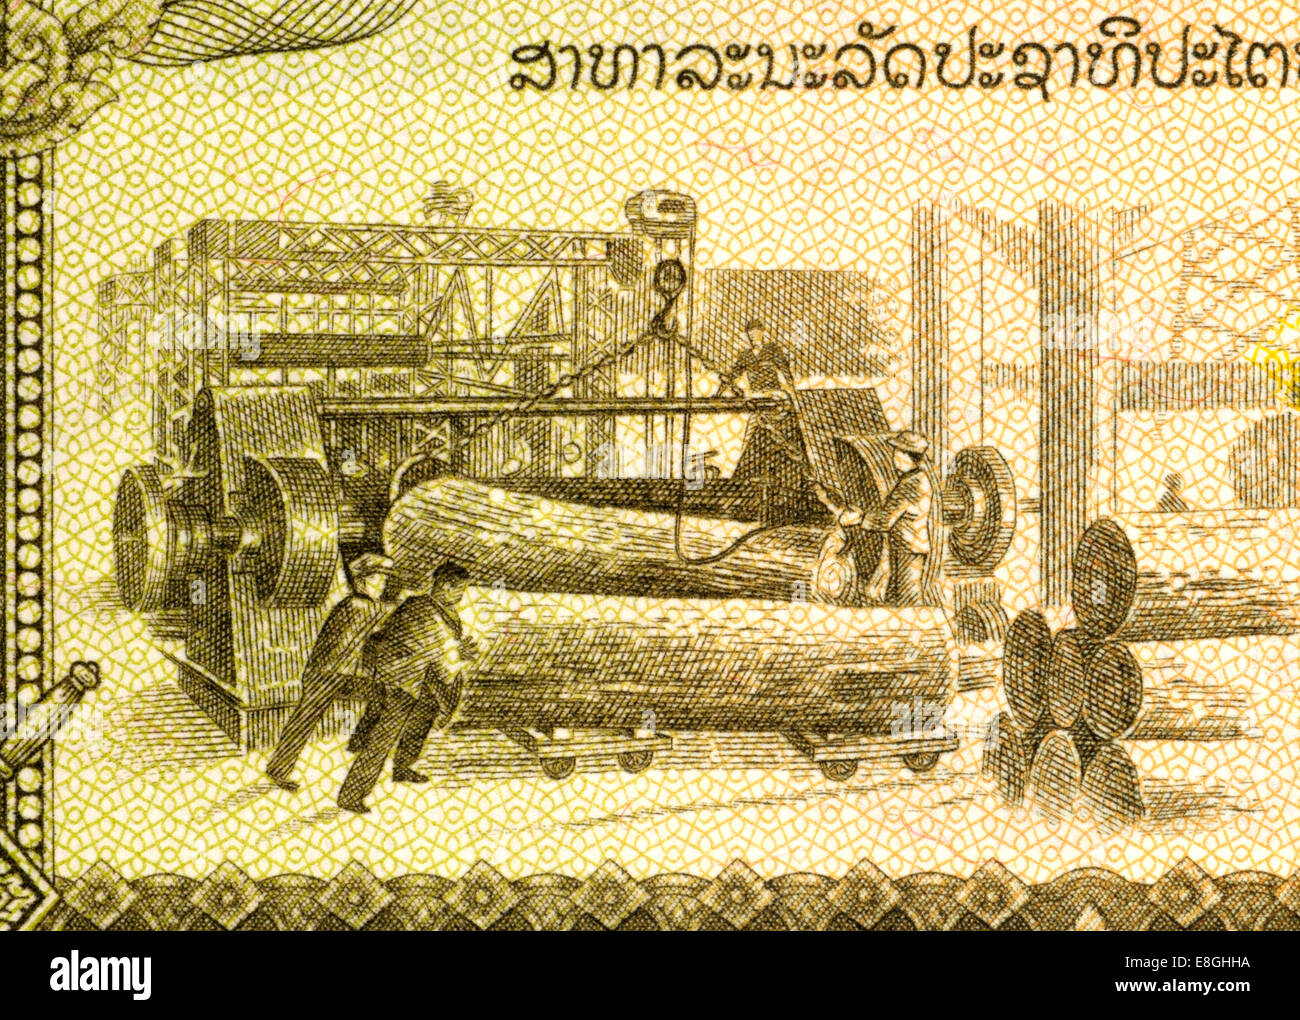 Detail from a Laos 10 Kip banknote showing logging Stock Photo